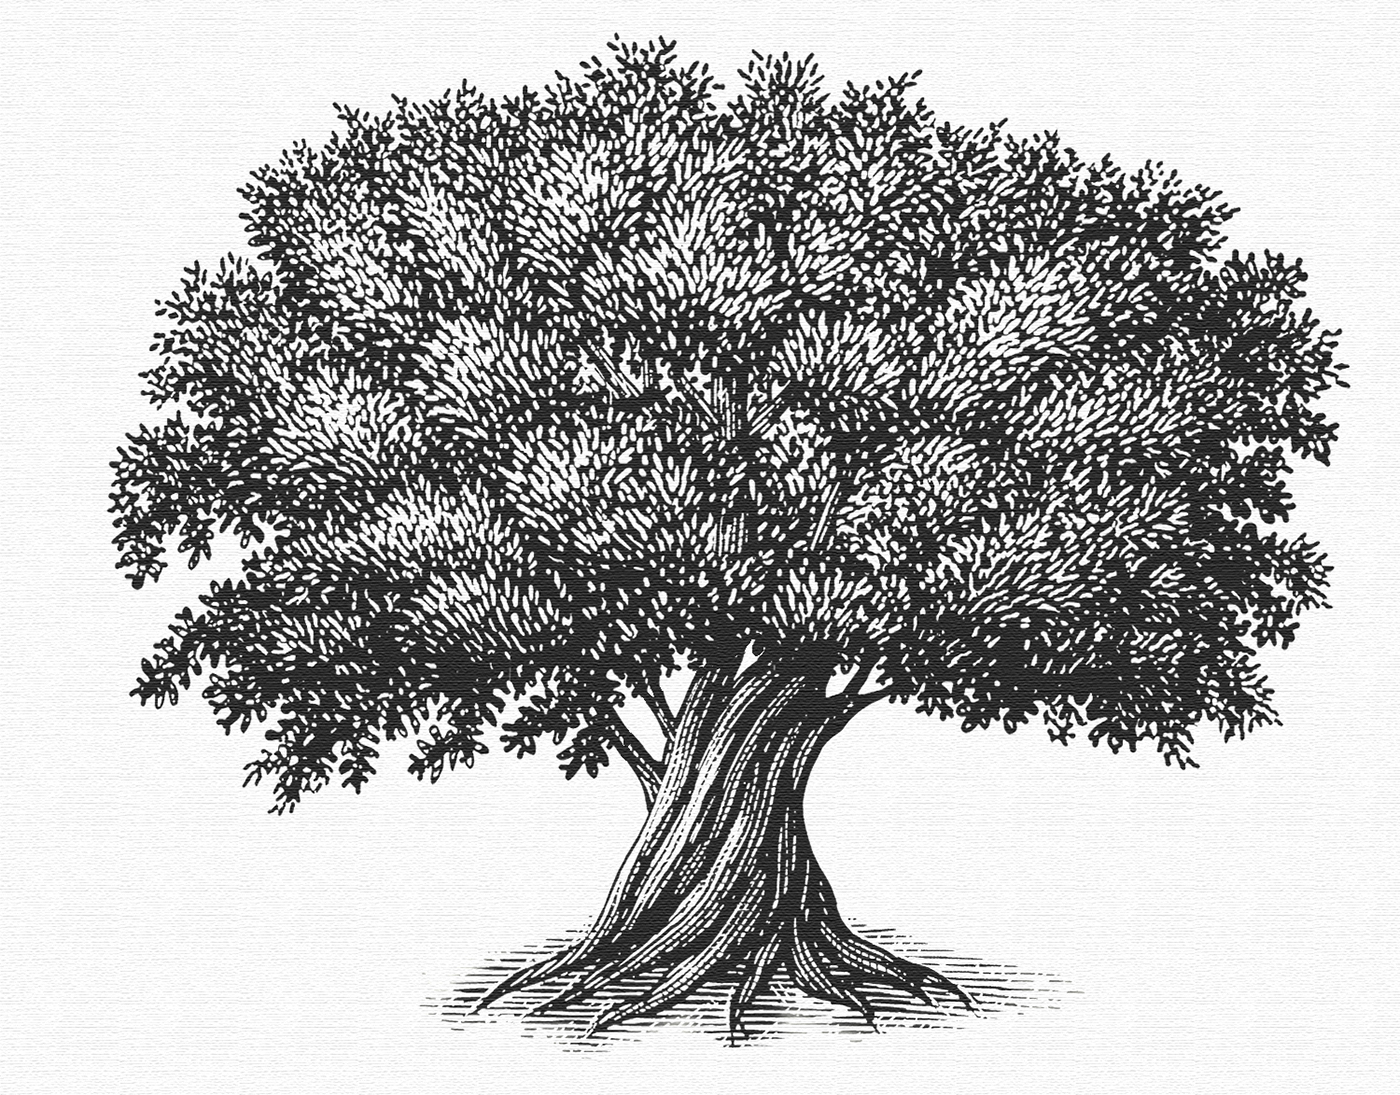 Sycamore Tree Sketch At Paintingvalley Com Explore Collection Of Sycamore Tree Sketch